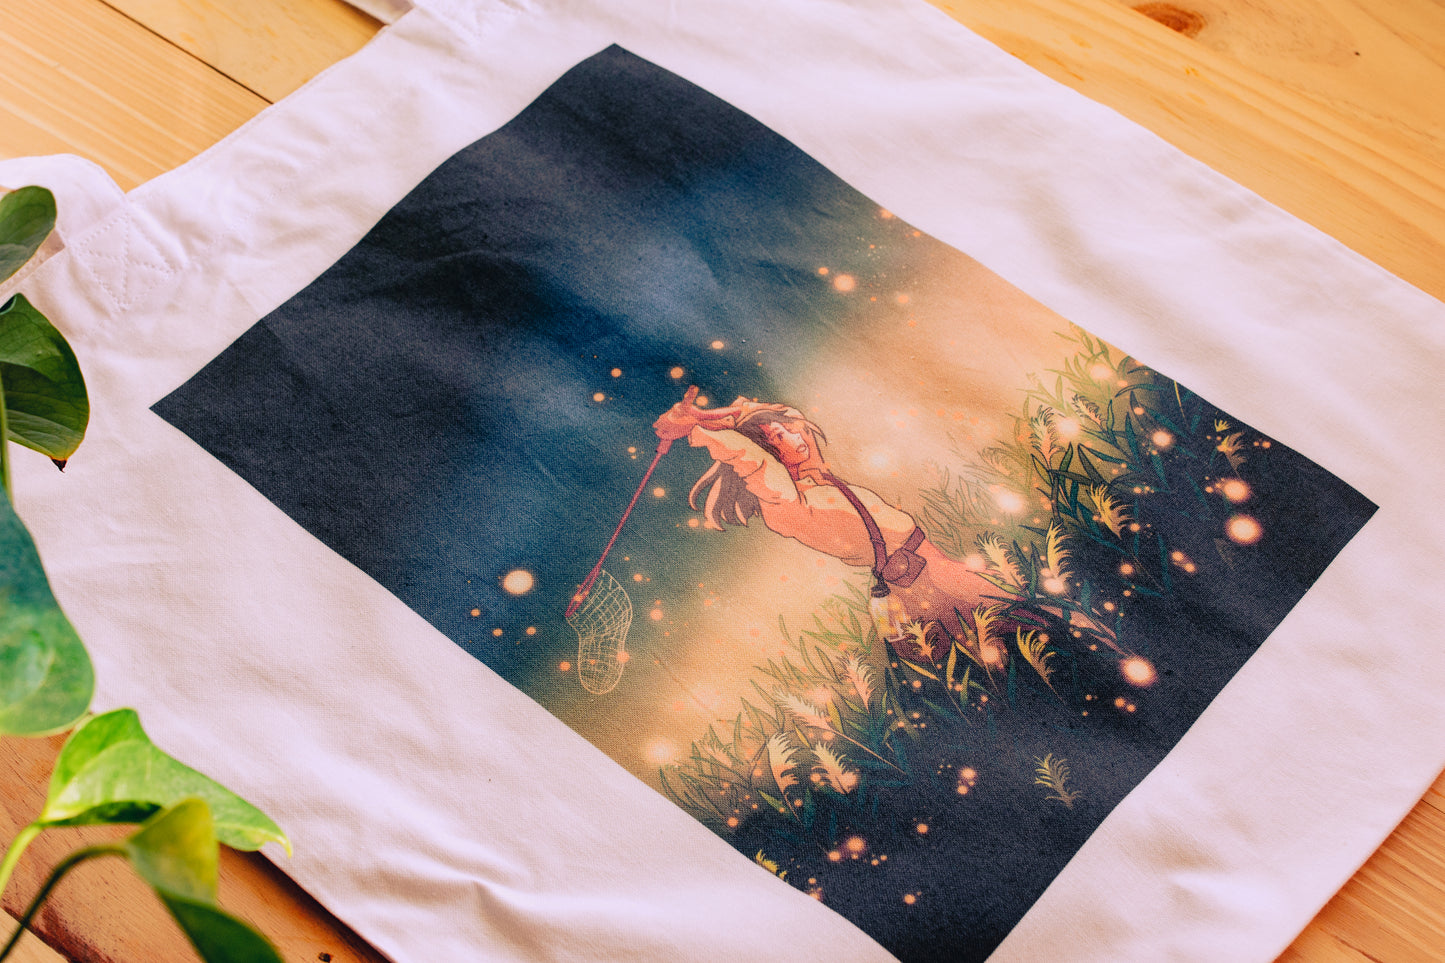 Tote bag - Firefly hunting